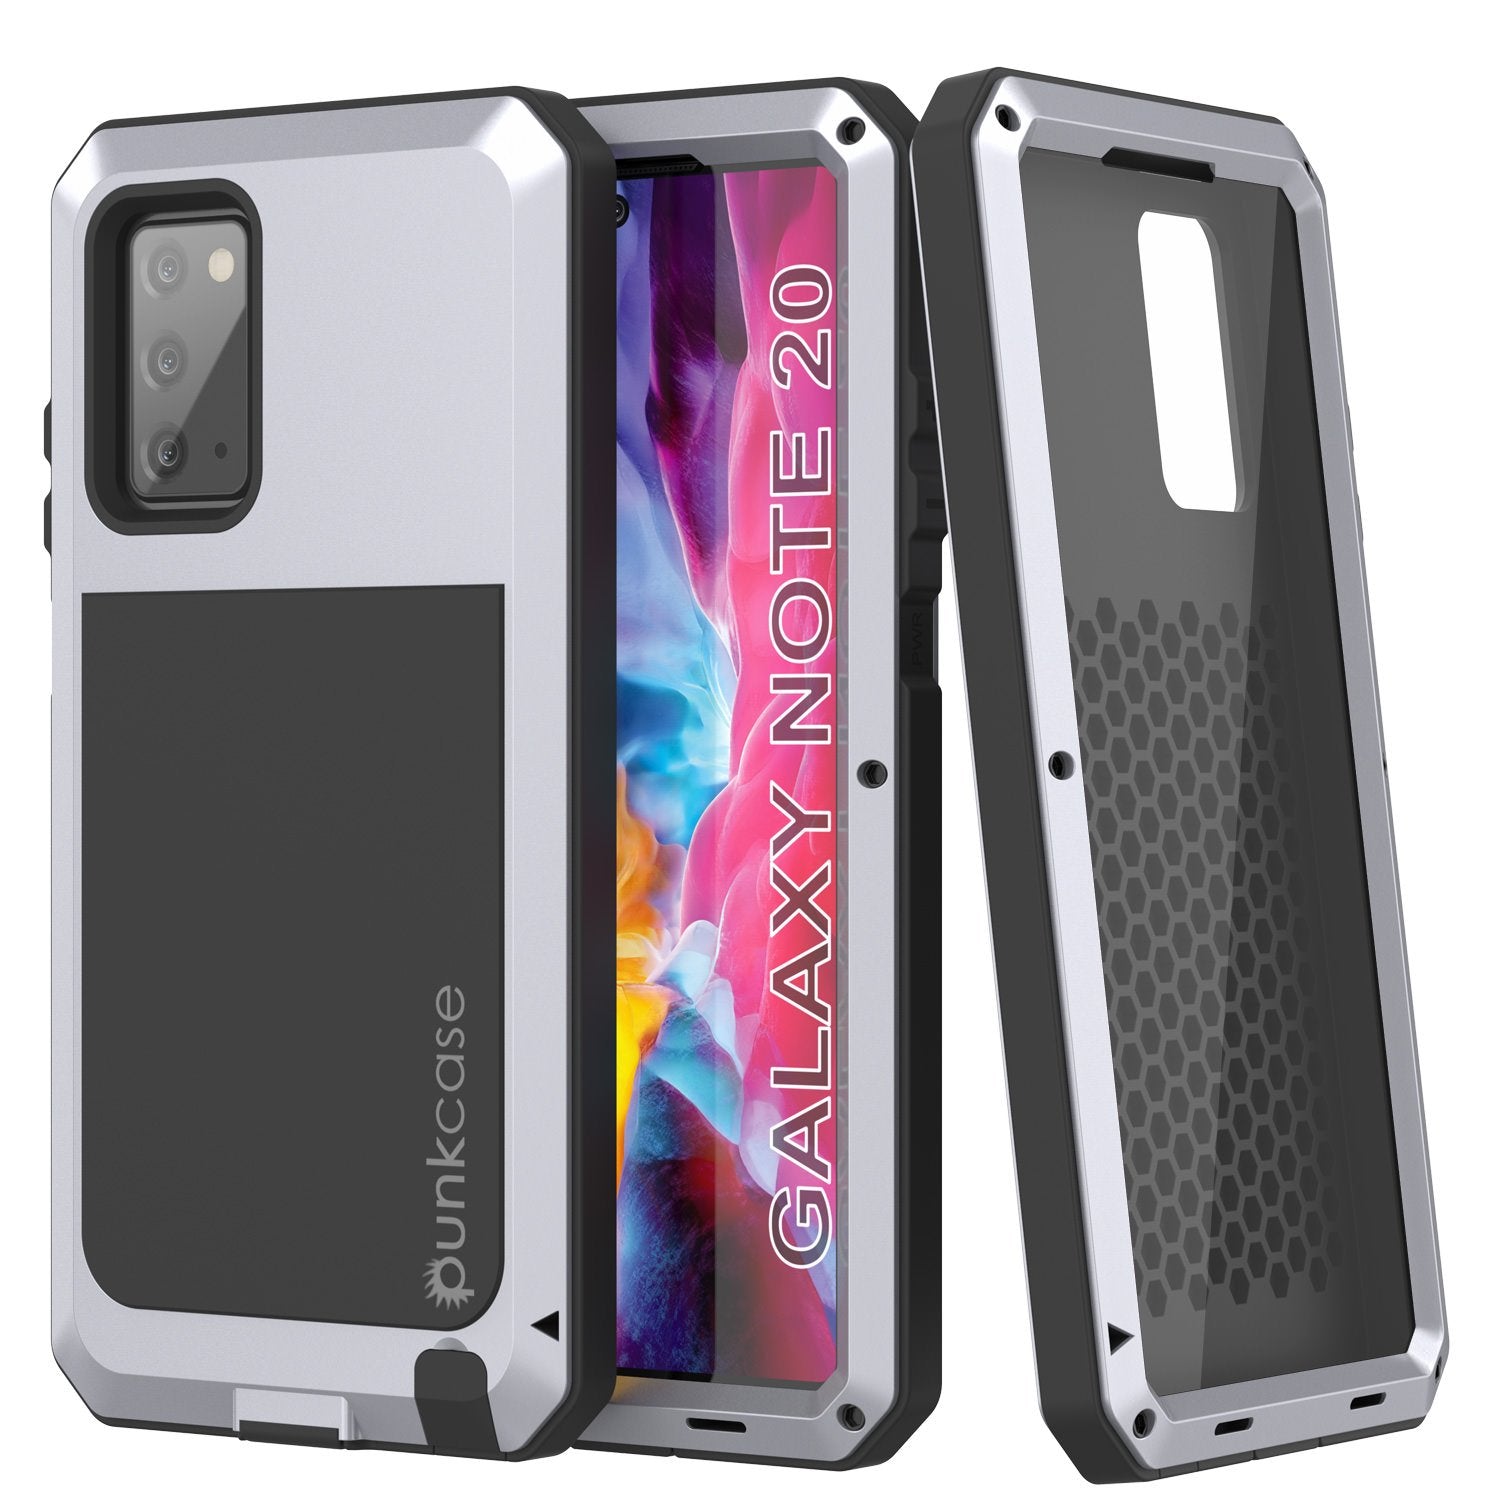 Galaxy Note 20  Case, PUNKcase Metallic White Shockproof  Slim Metal Armor Case [White] (Color in image: white)